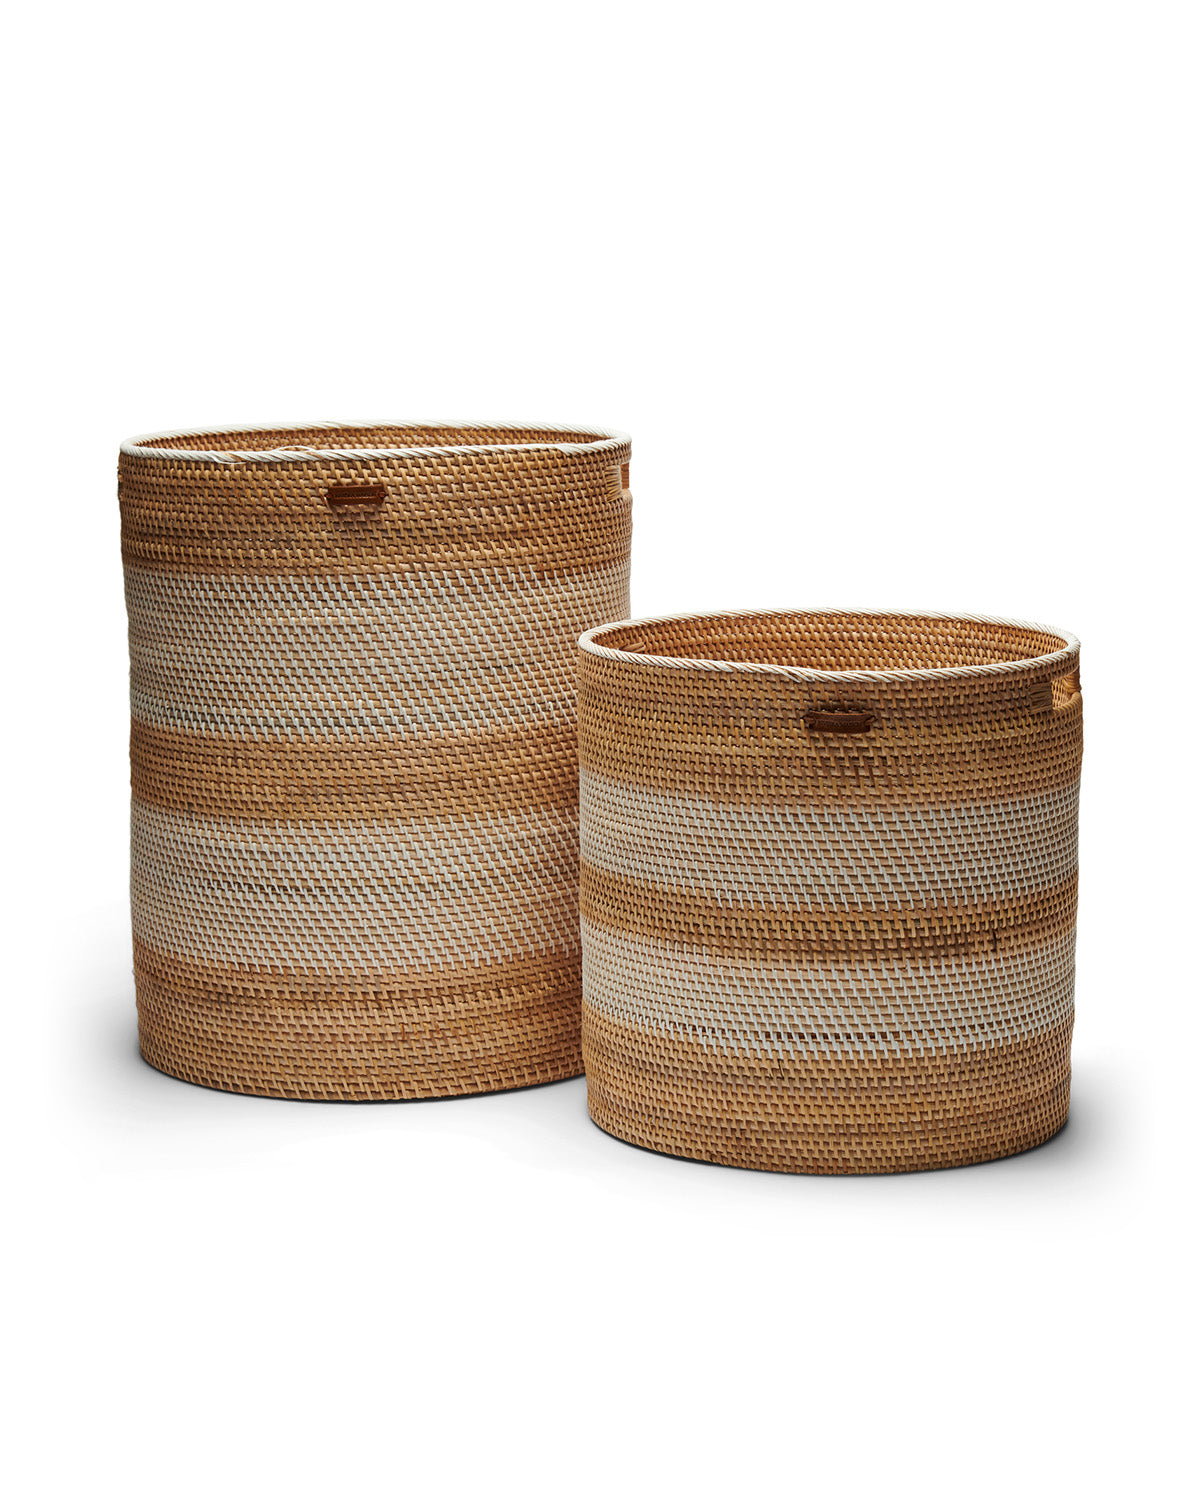 BASKET SET OF 2  made from woven Rattan white striped